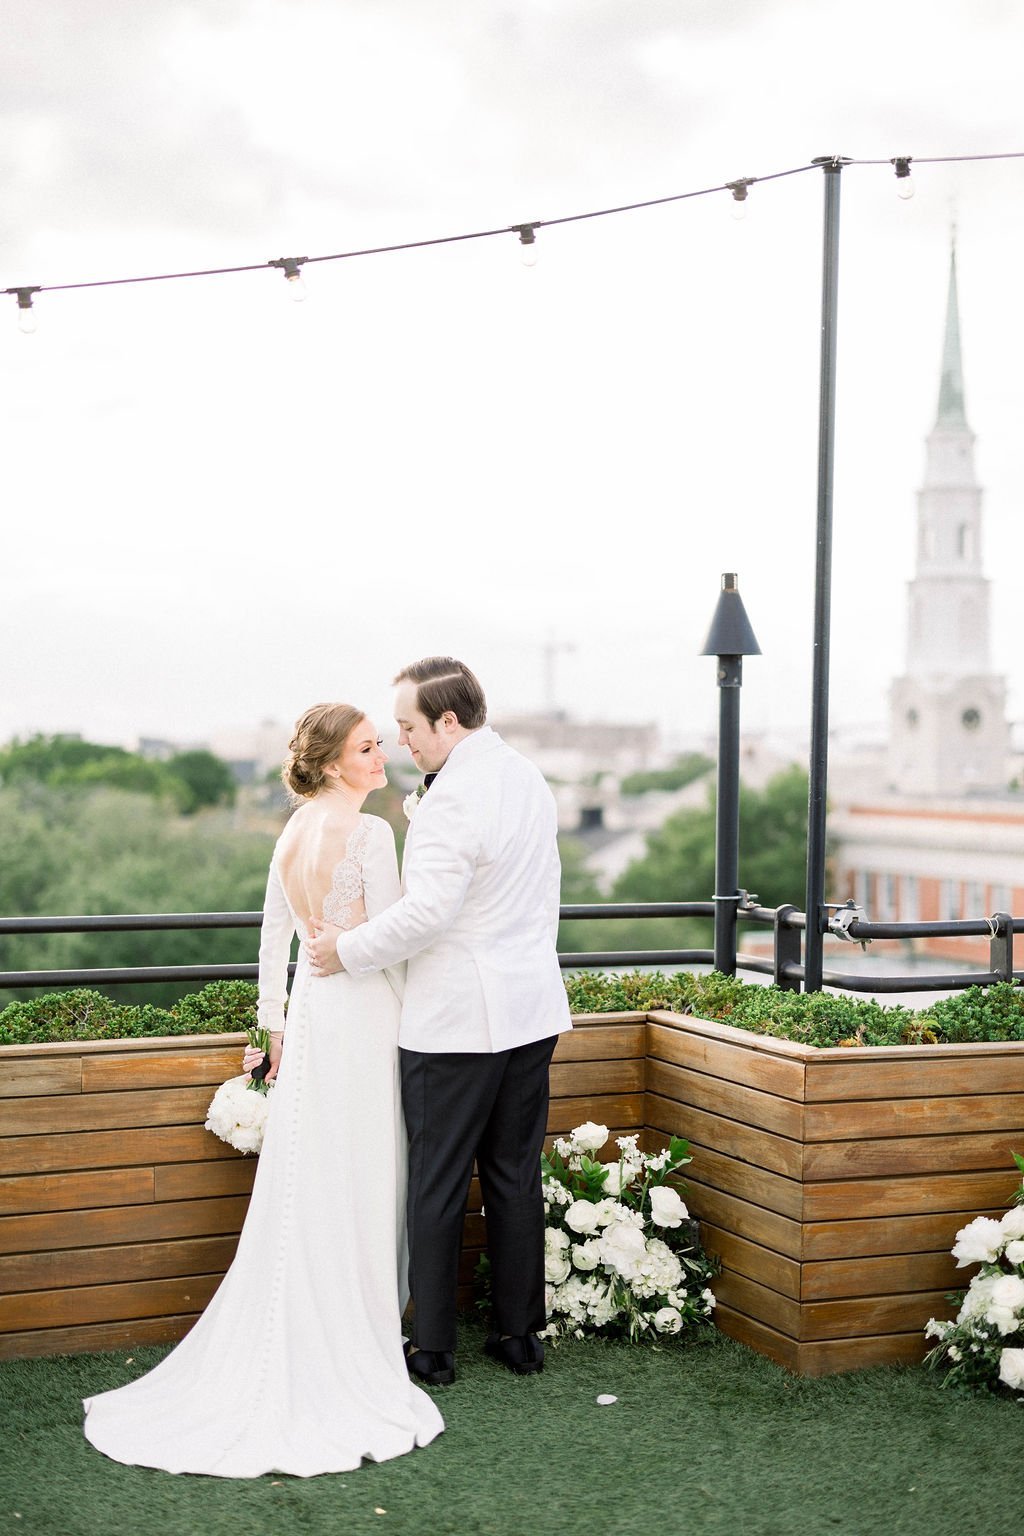 emily-and-eds-sophisticated-southern-wedding-at-the-perry-lane-in-savannah-ga-featuring-a-black-and-white-color-palette-and-florals-designed-by-savannah-florist-ivory-and-beau-19.JPG